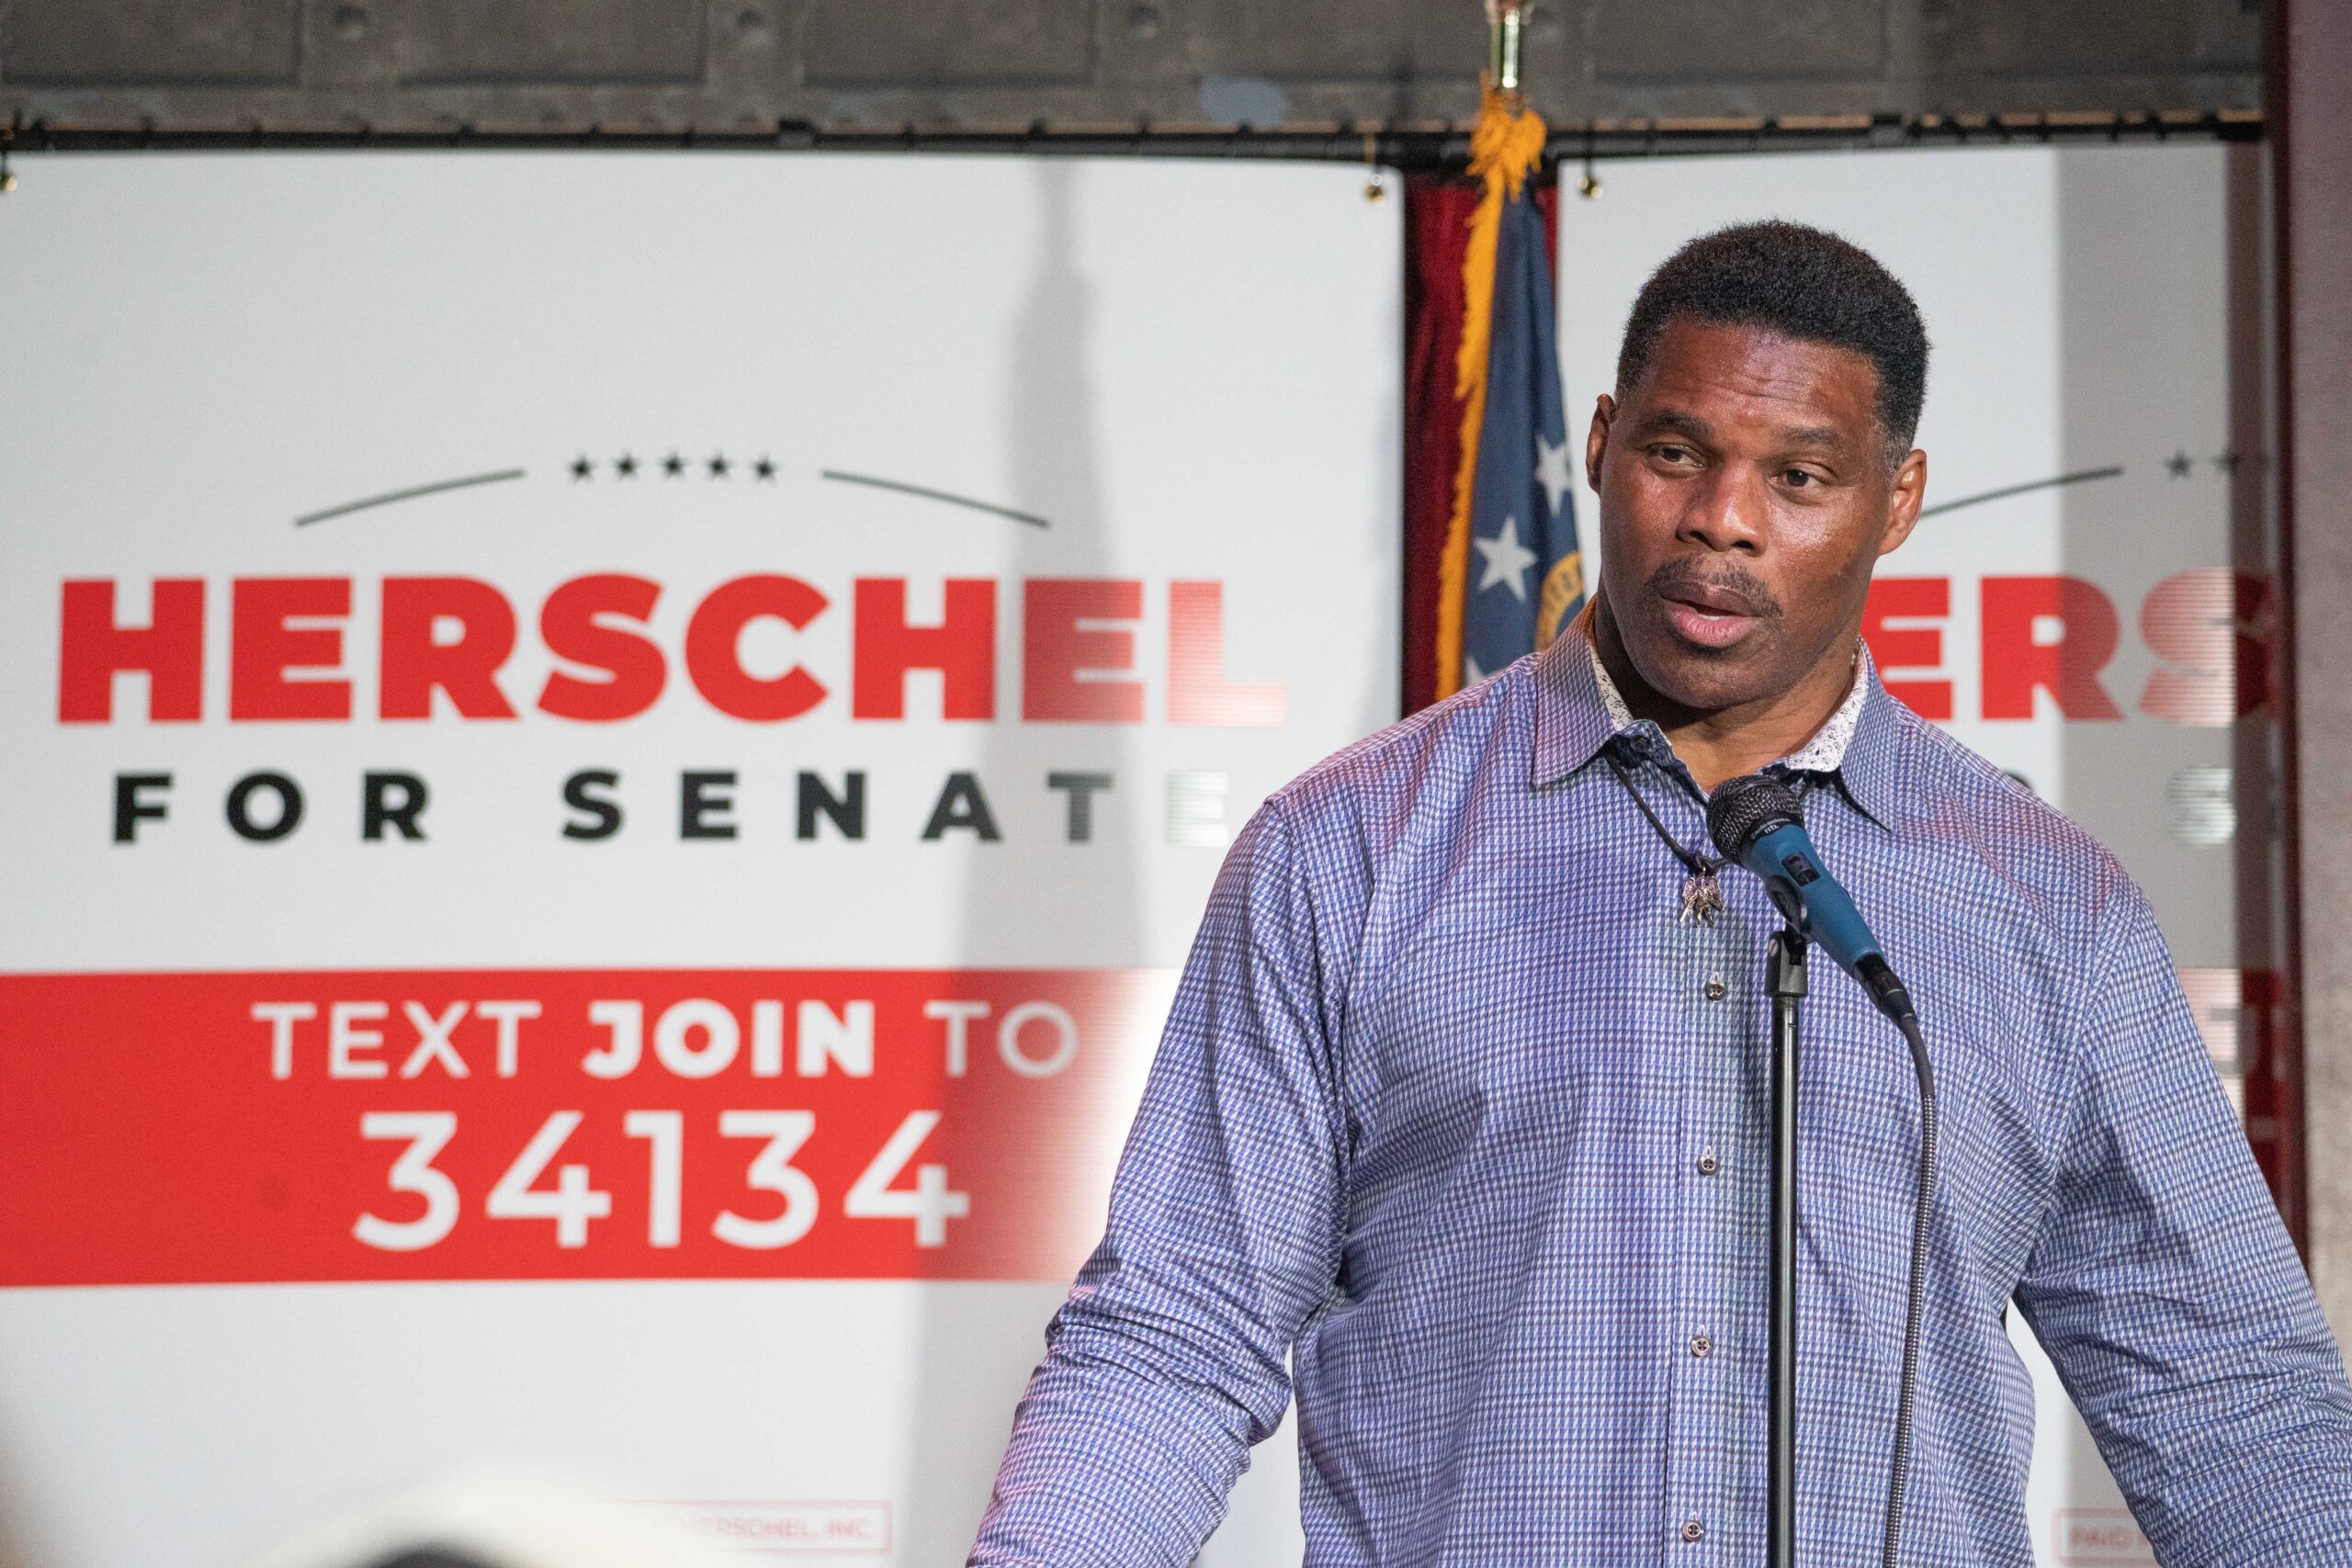 Herschel Walker, Who Hasn’t Had a Presser in Almost Two Months, Reportedly Distancing Journalists ‘20 Feet’ After Events (mediaite.com)